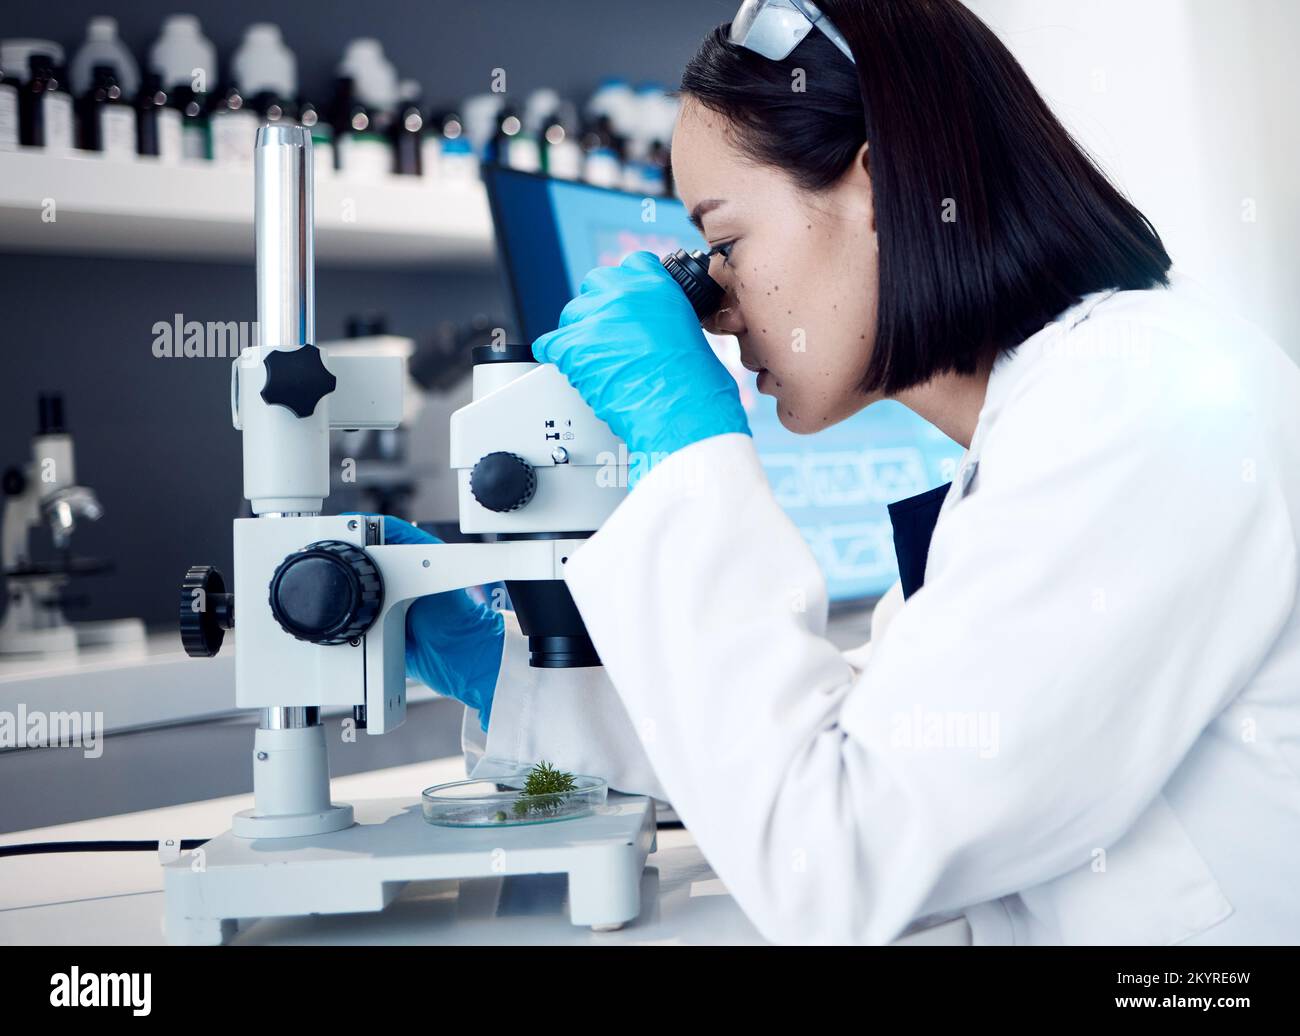 Botany science, microscope plant analysis or scientist research for natural pharmaceutical drugs, biotechnology innovation or ecology. Marijuana Stock Photo